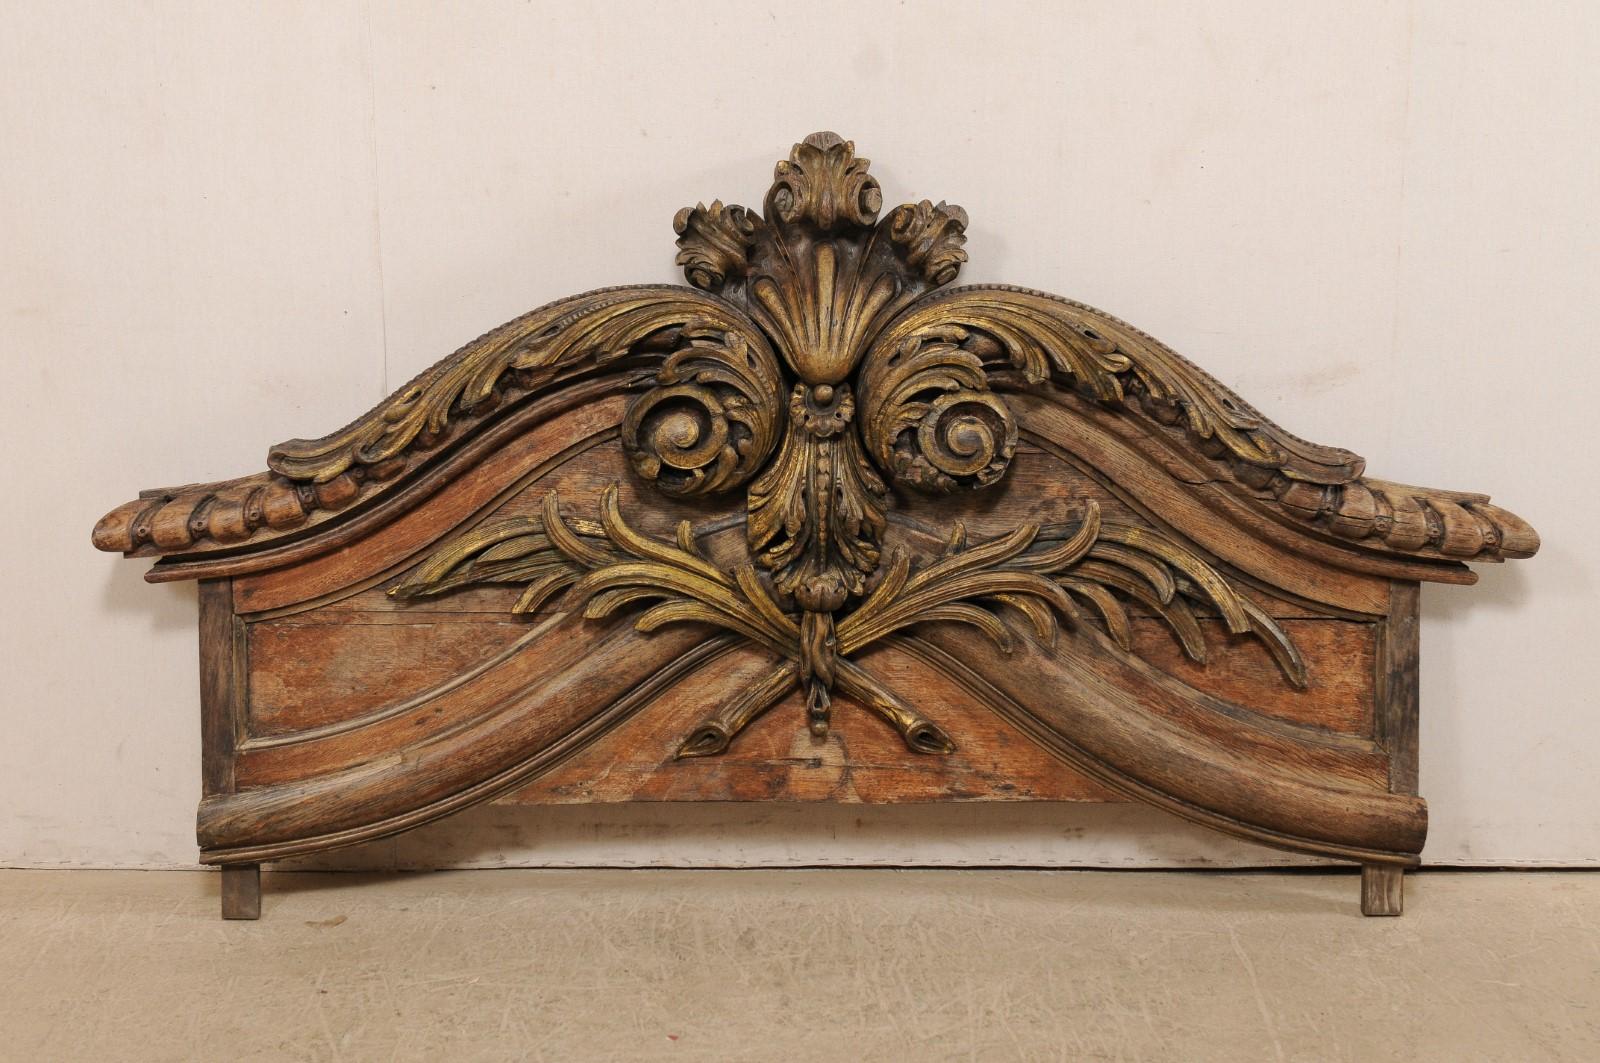 A large-sized American carved wood wall plaque from the 19th century. This antique wall decoration features a horizontally positioned plaque, which is approximately 6.5 feet in length, with a beautiful display of three dimensional carvings depicting